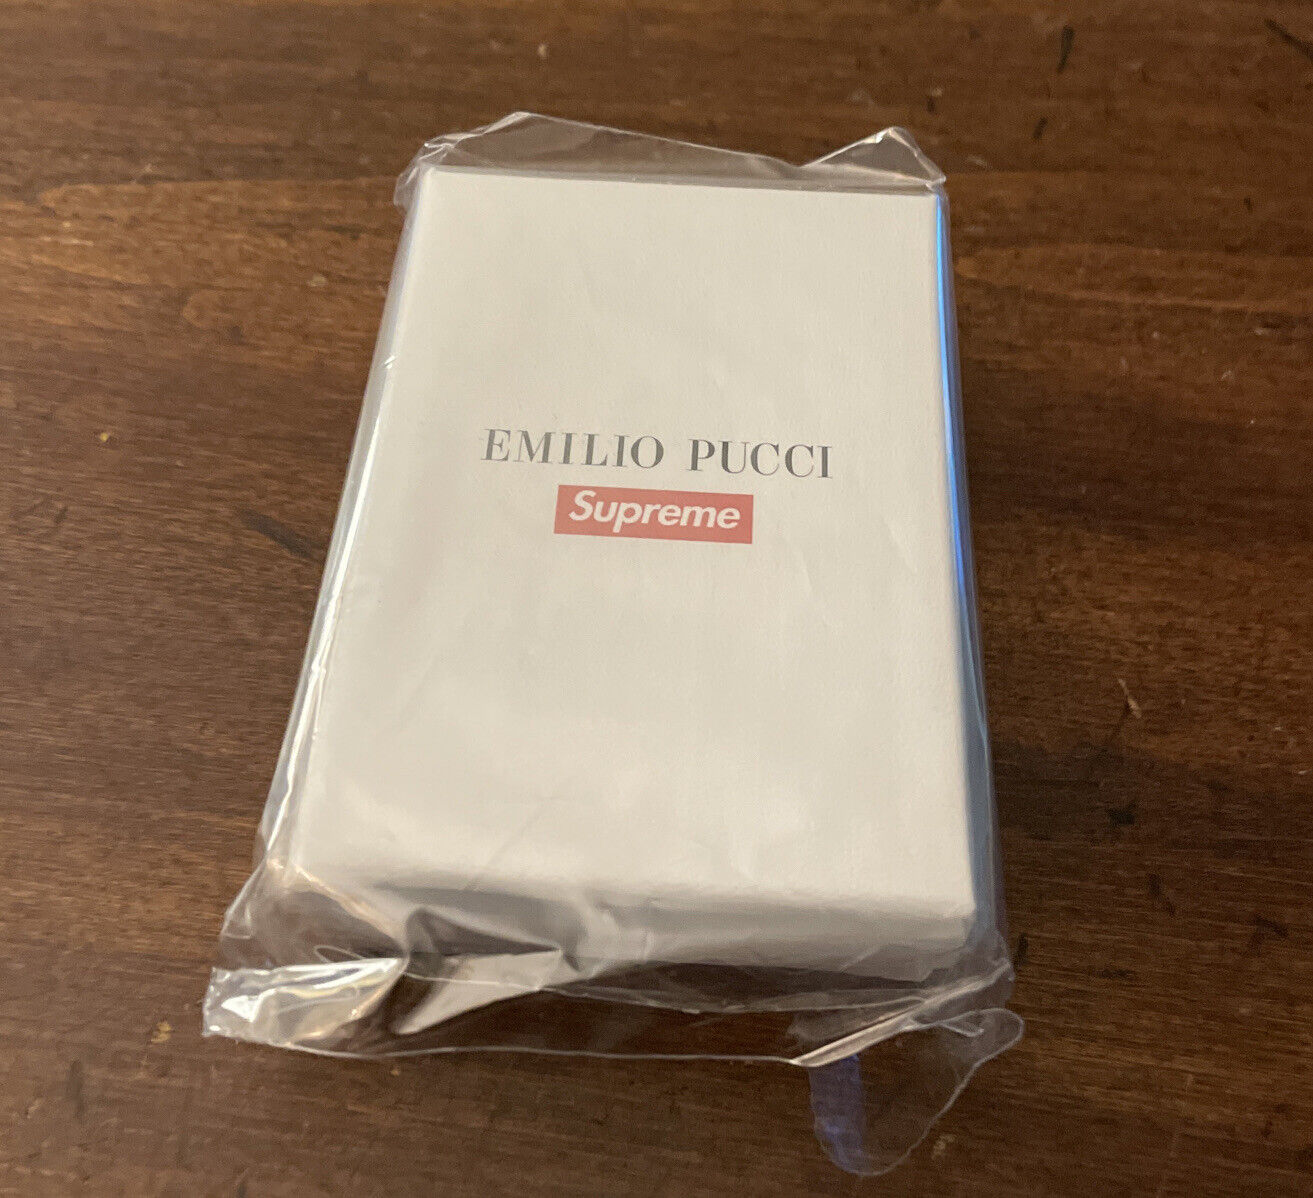 Supreme/ Emilio Pucci Zippo Lighter Black SS21 Week 16 (IN HAND) AUTHENTIC/ NEW